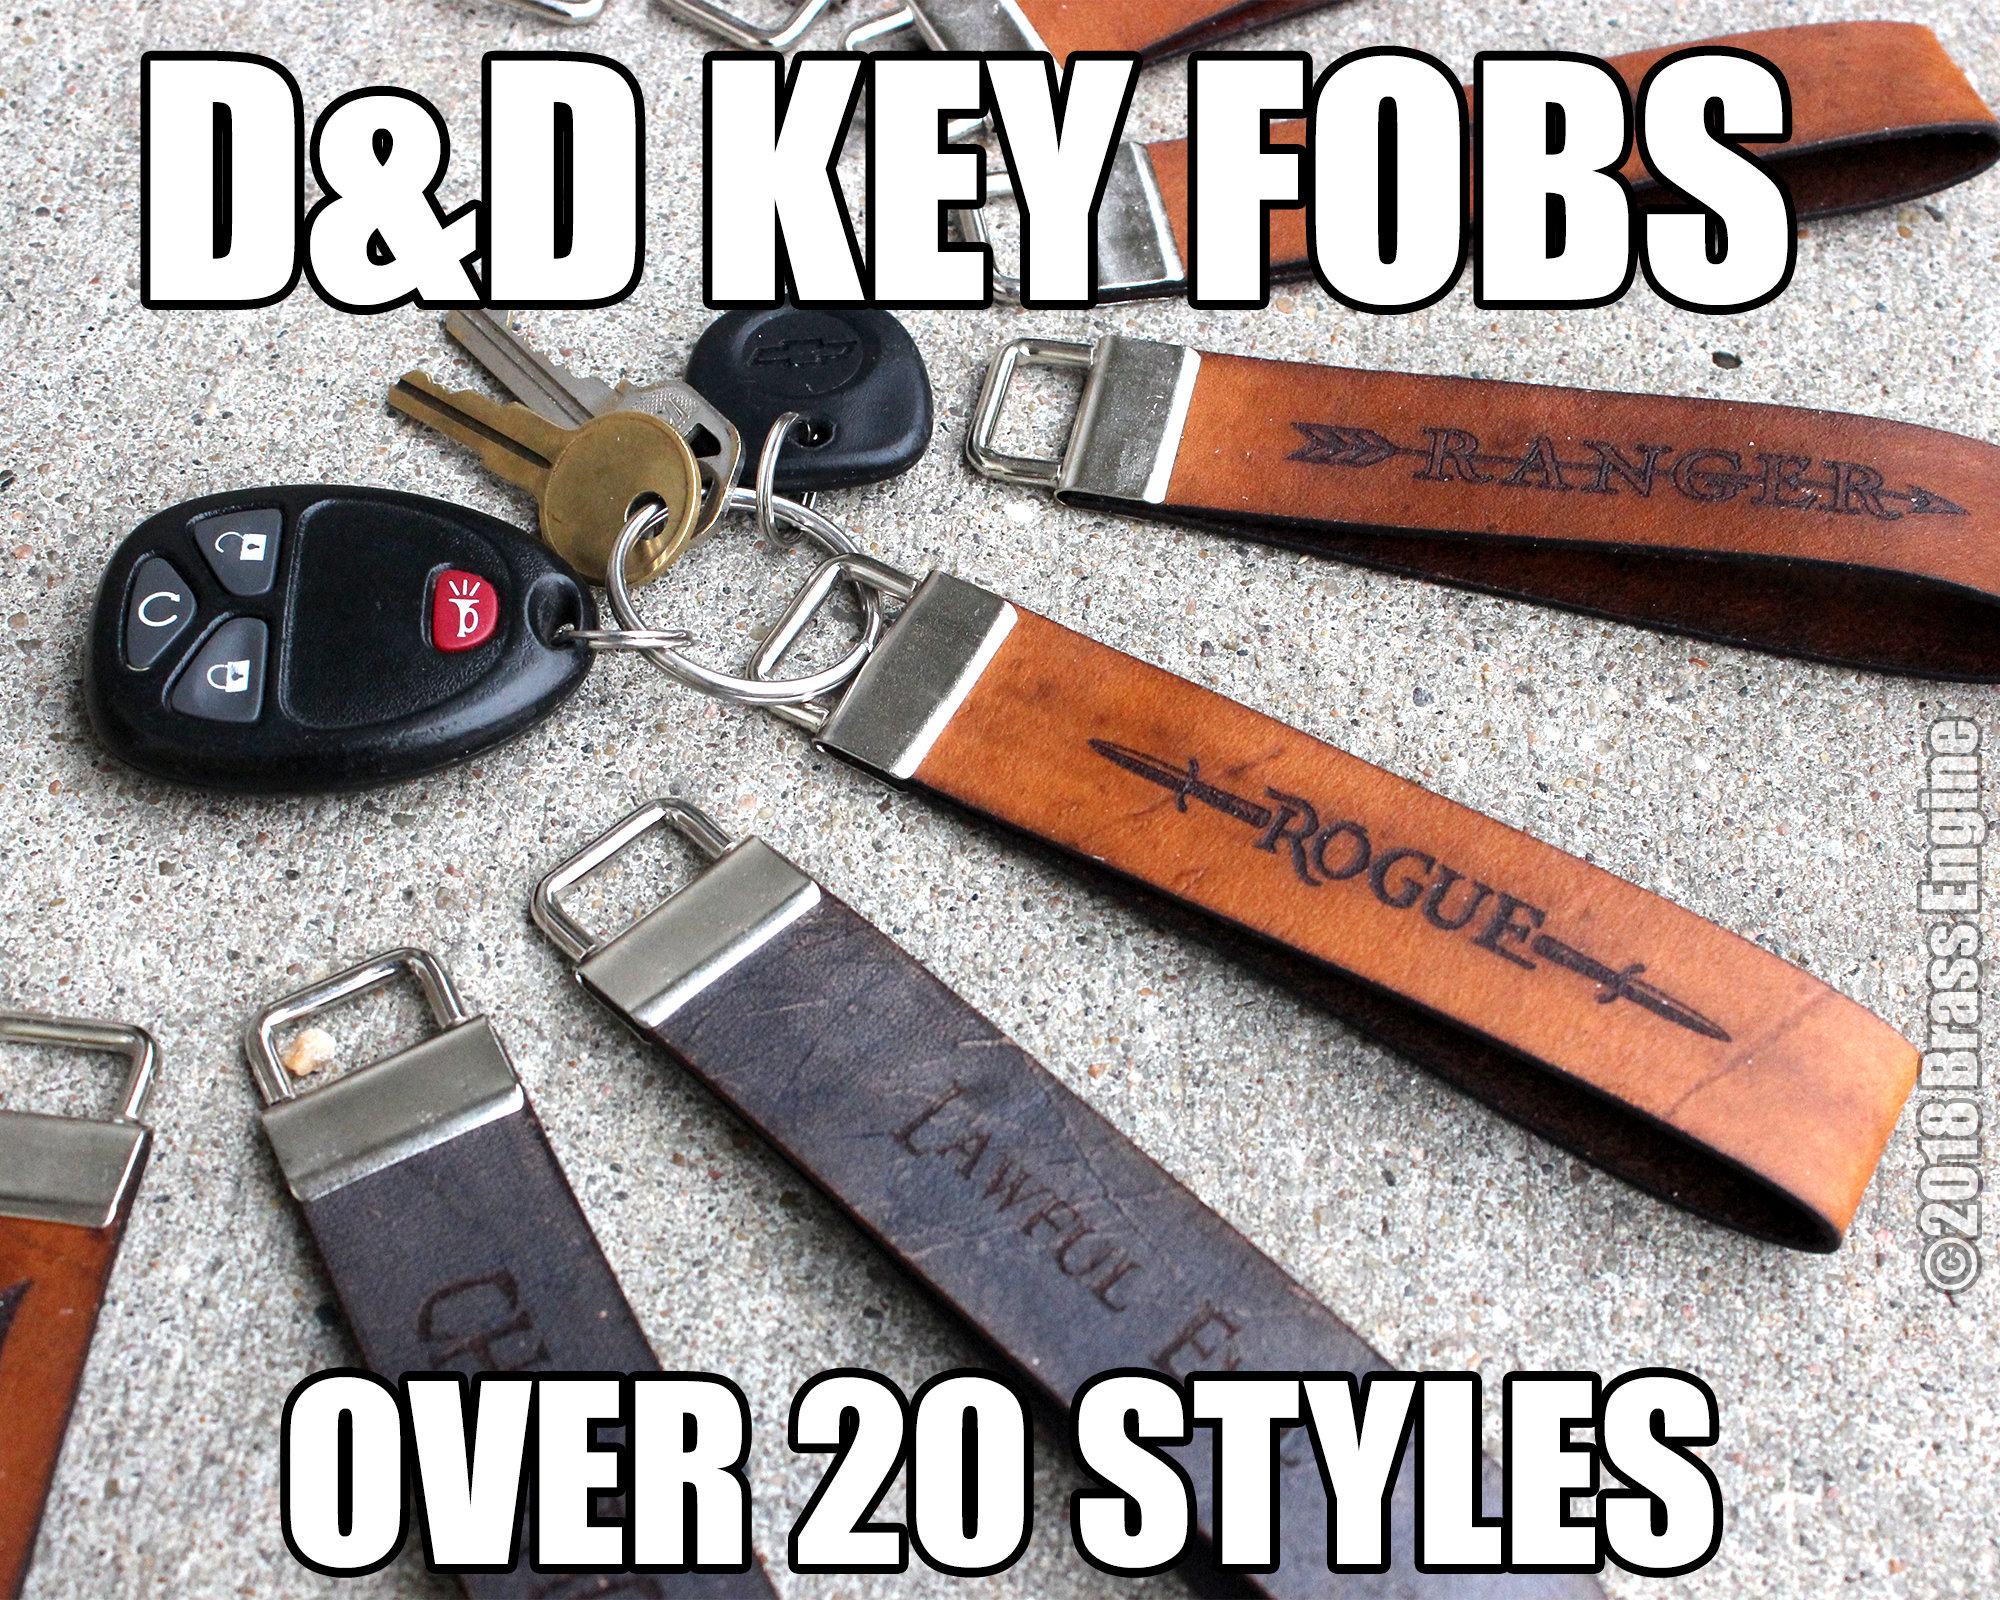 Unique Bargains Car Fob Key Chain Keychains Holder PU Leather 360 Degree  Rotatable with D Shaped Ring Key Rings Set Pink